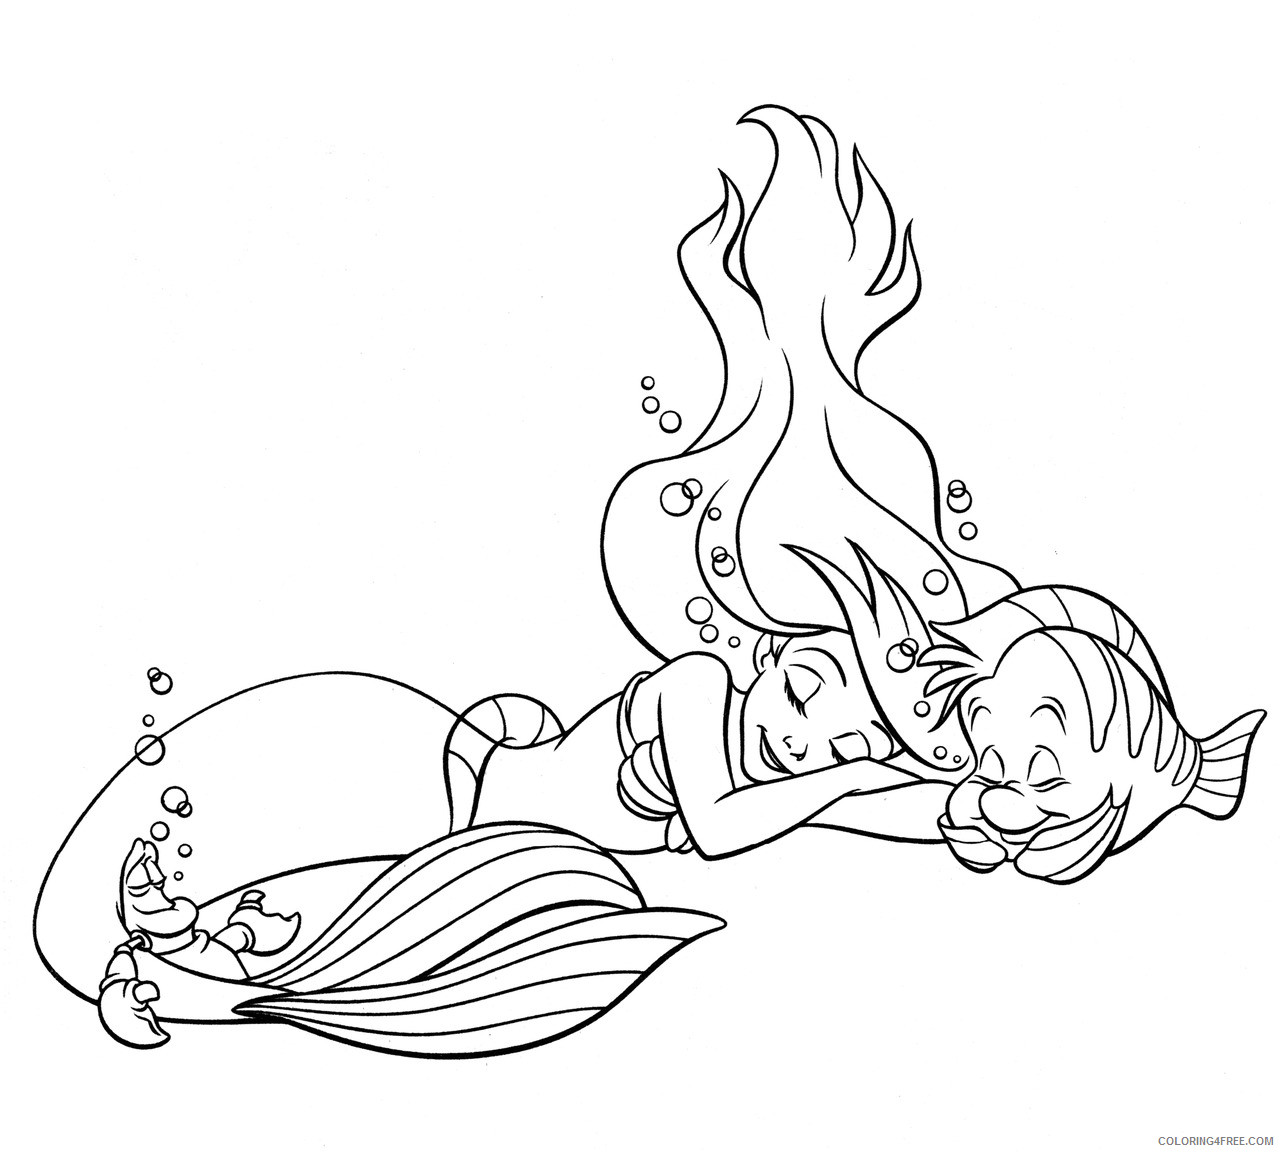 Ariel the Little Mermaid Coloring Pages Cartoons Free Ariel Printable 2020 0594 Coloring4free